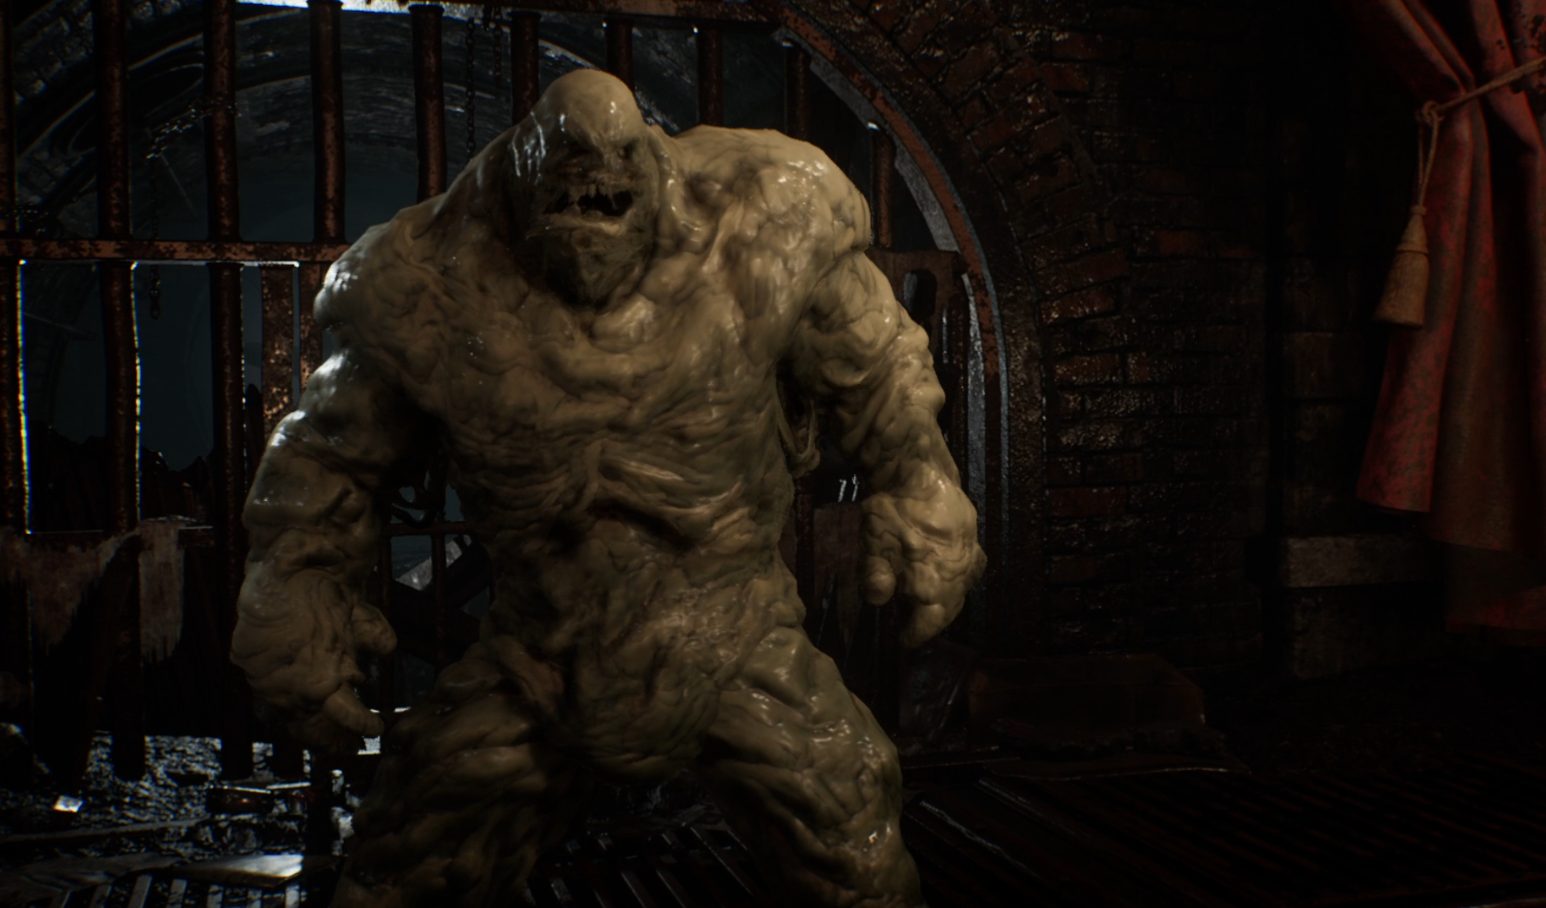 clayface case file featured image gotham knights